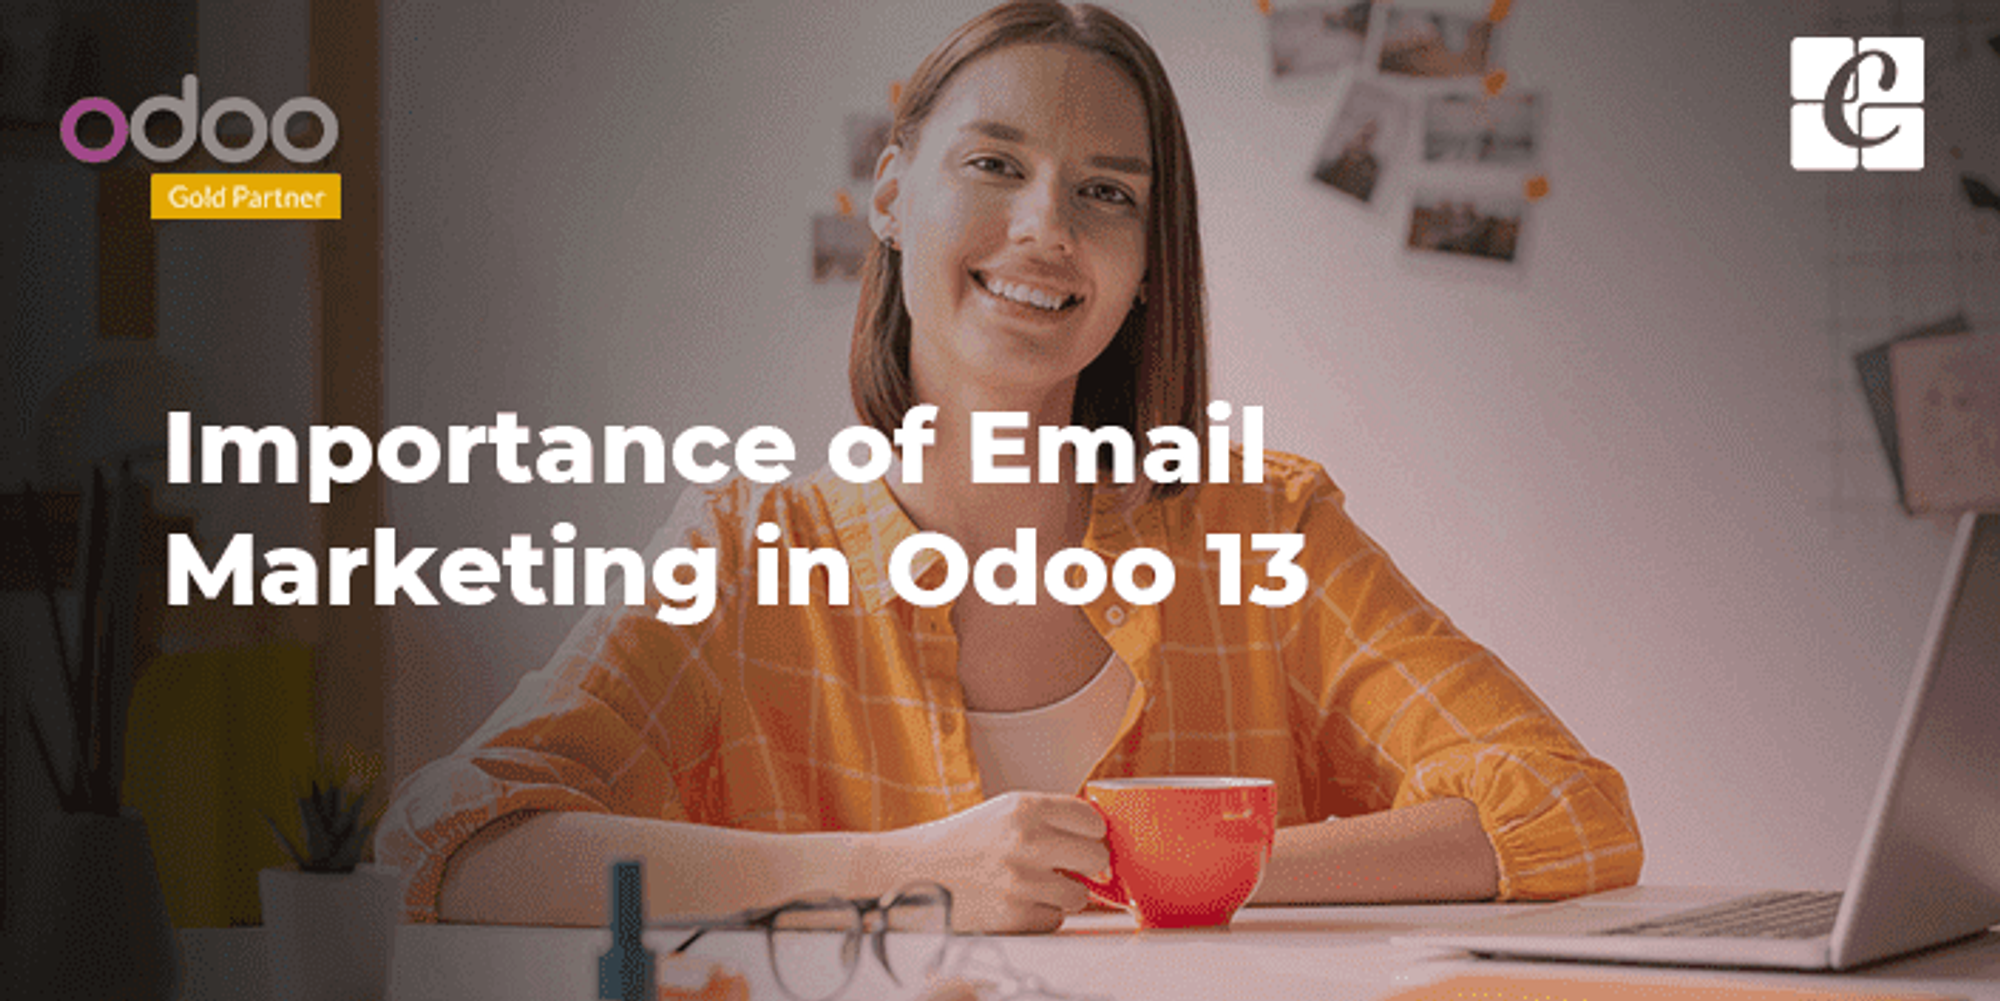 Importance of Email Marketing in Odoo 13